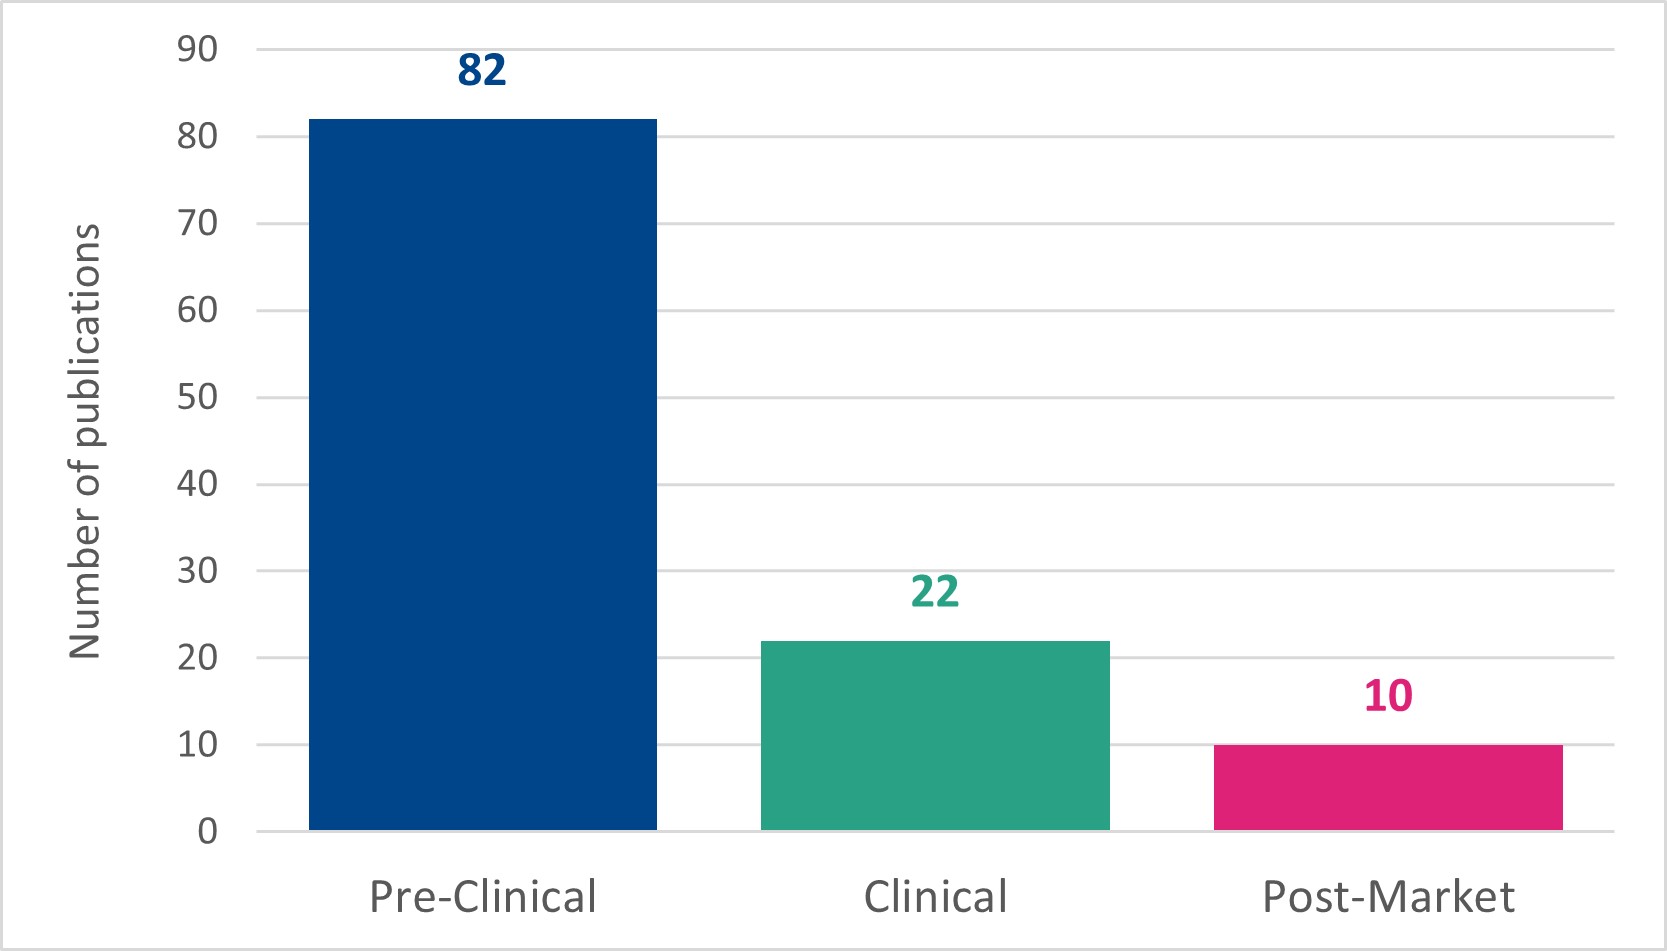 Bar chart showing Imperial Brands publication totals at each stage